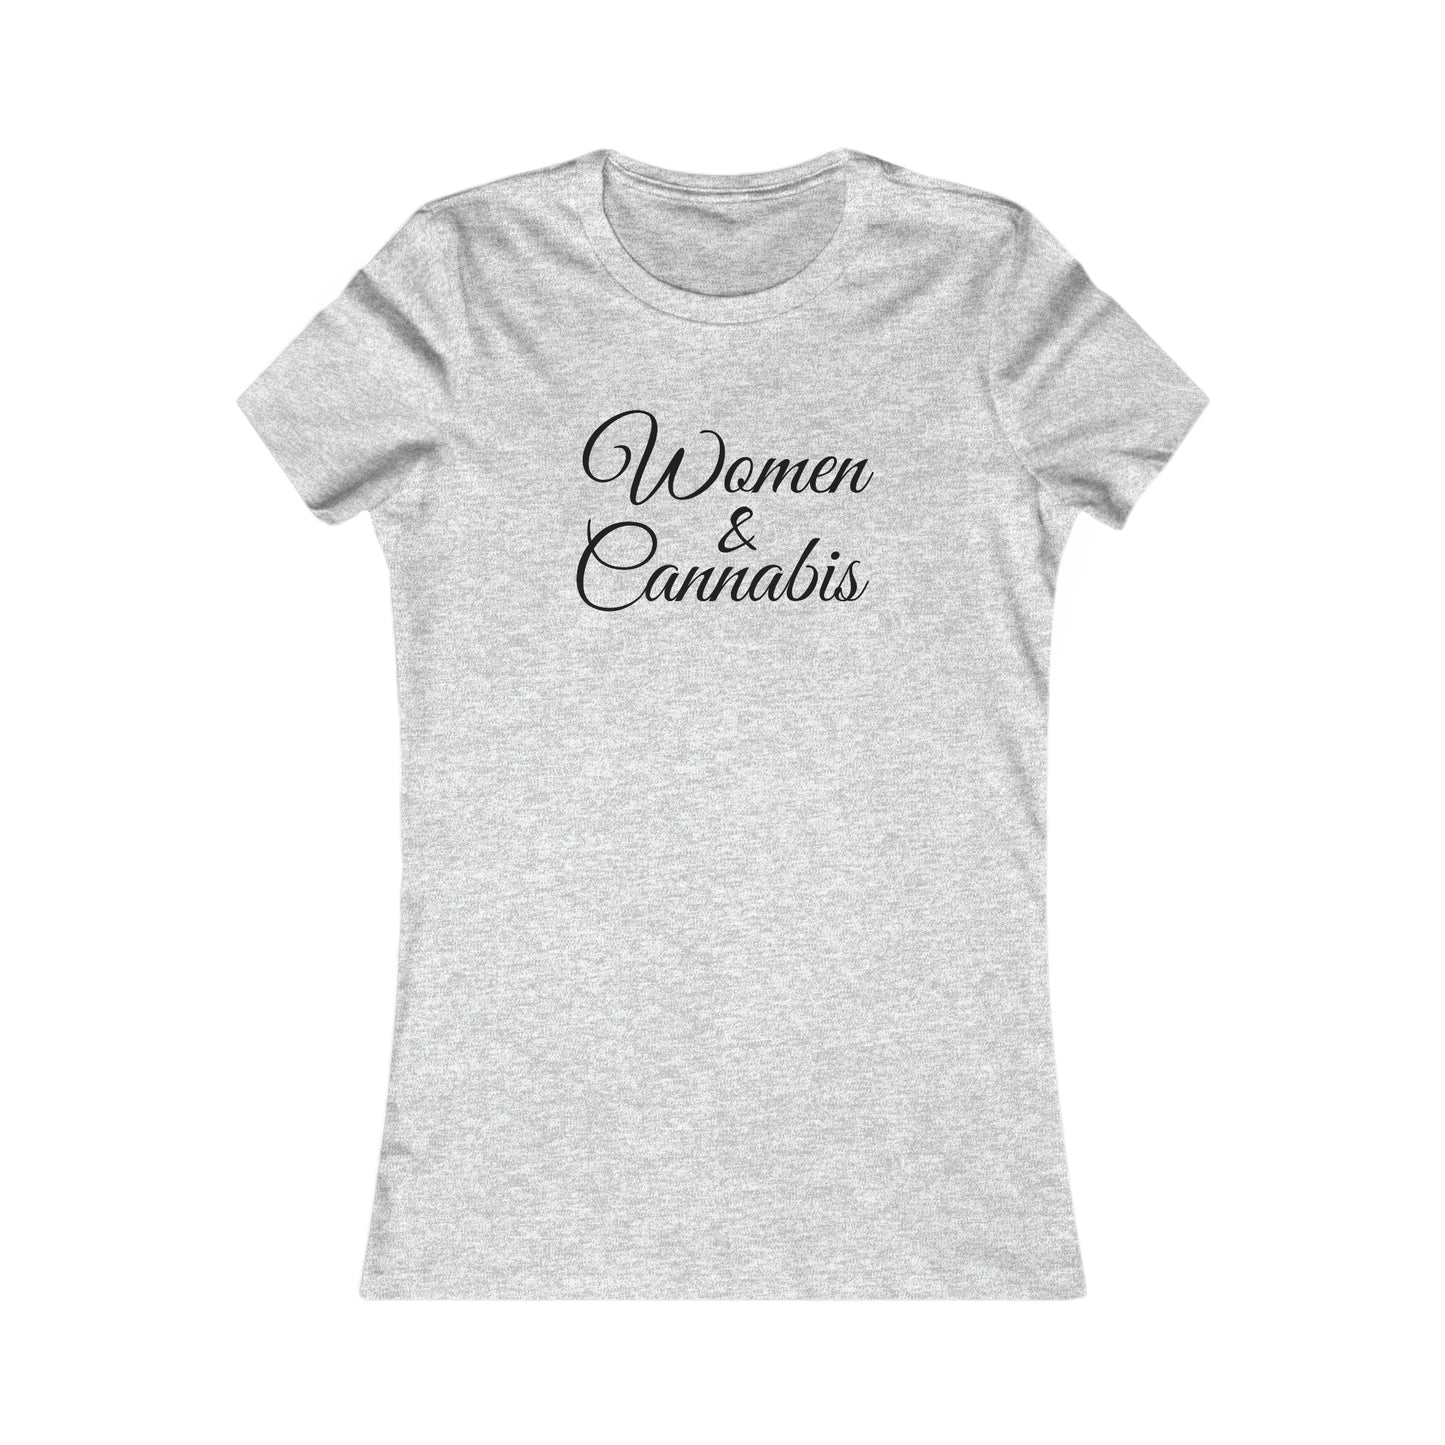 Women & Cannabis Favorite Tee with Black Font